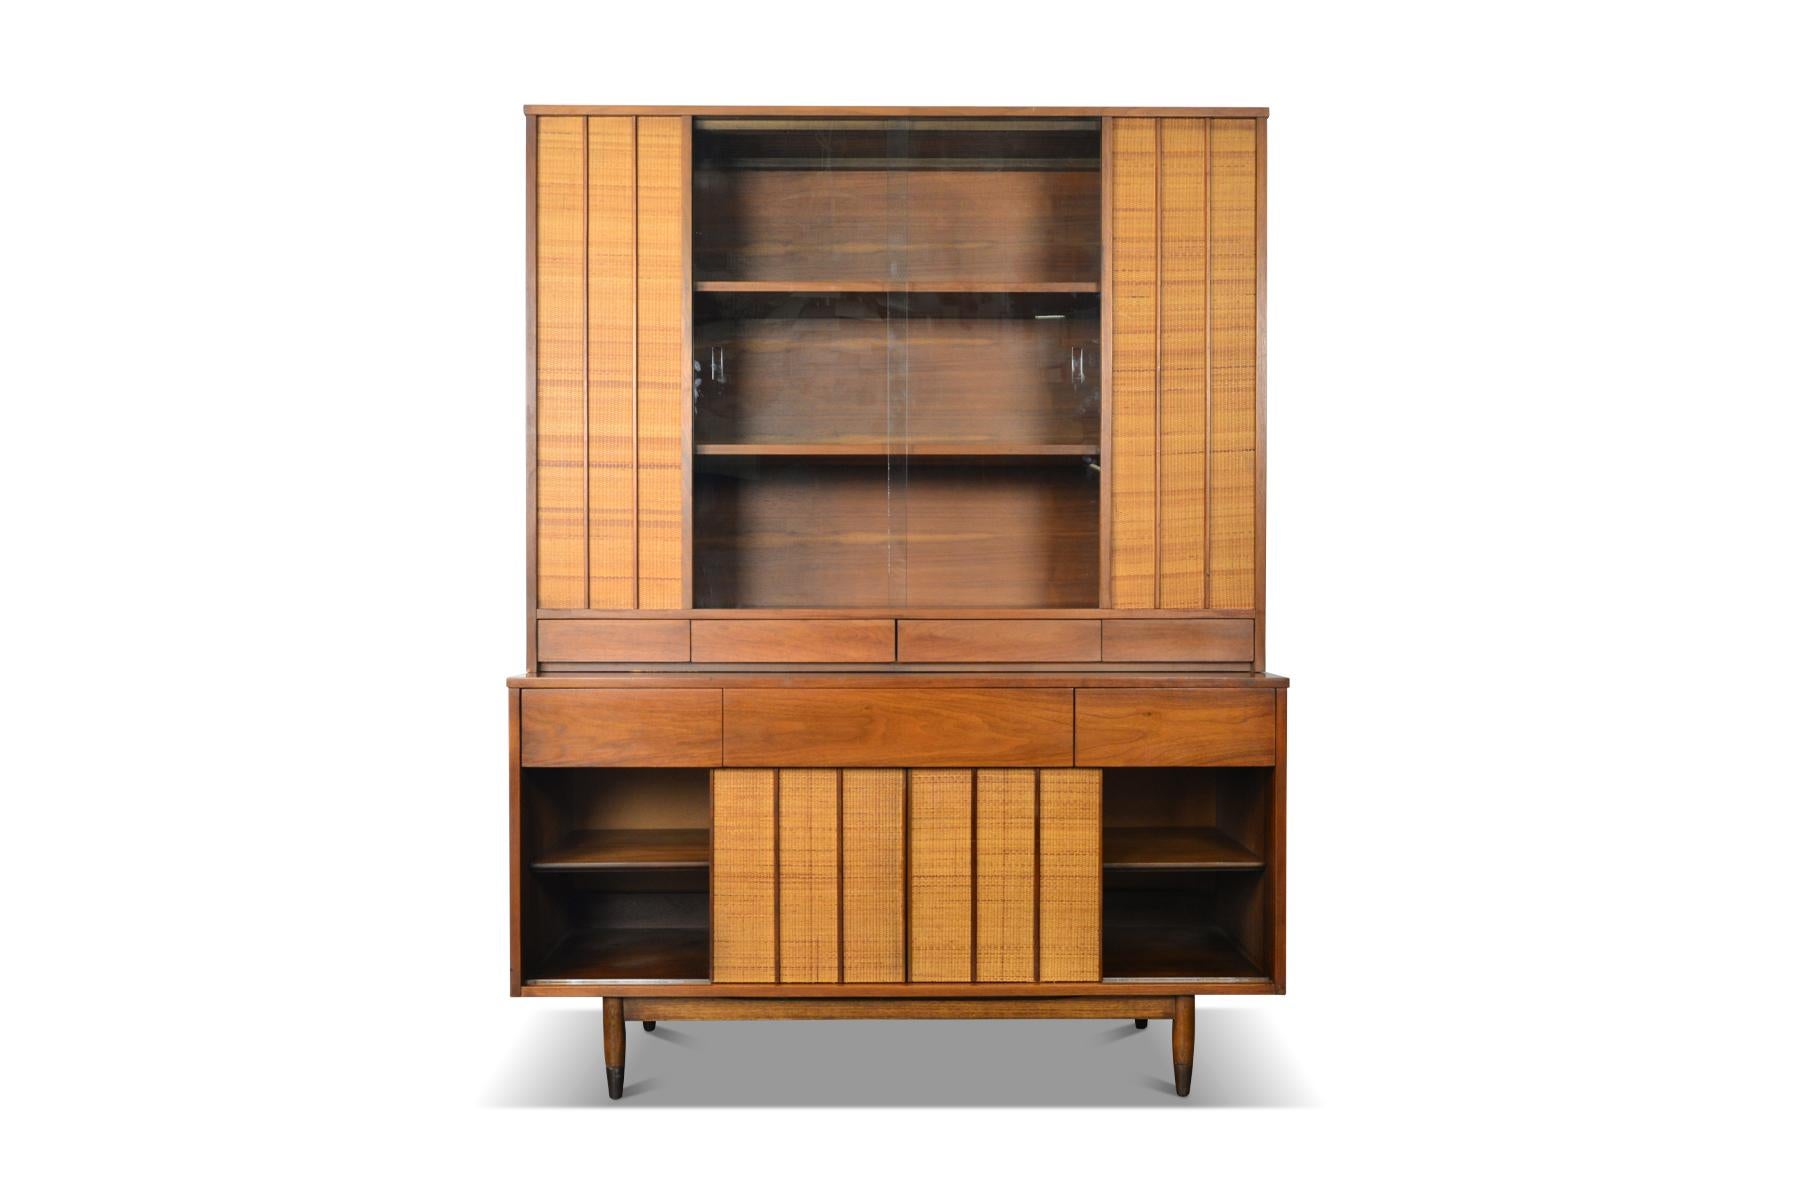 North American American Mid-Century Modern Walnut and Cane Credenza with Hutch